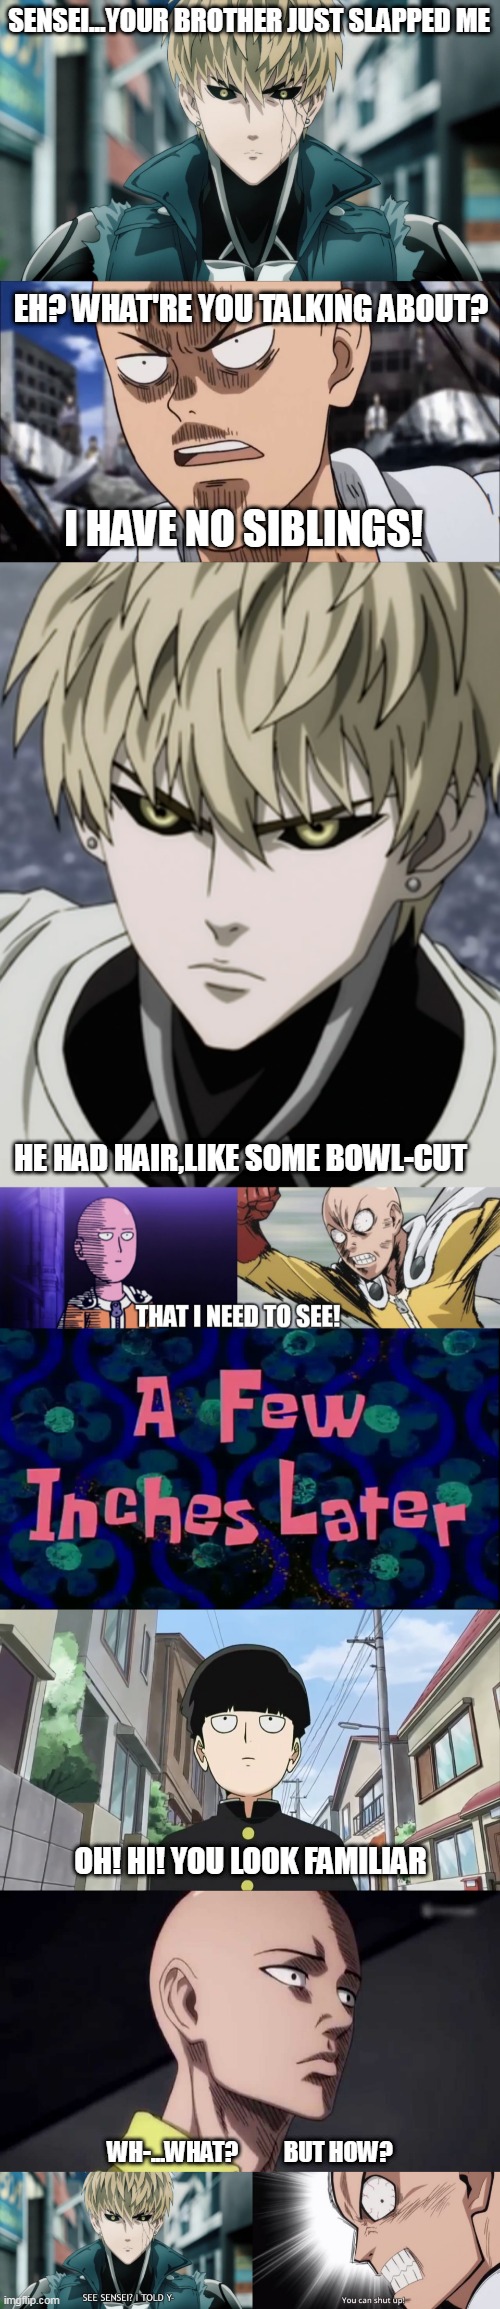 The greatest crossover doesn't exi- | SENSEI...YOUR BROTHER JUST SLAPPED ME; EH? WHAT'RE YOU TALKING ABOUT? I HAVE NO SIBLINGS! HE HAD HAIR,LIKE SOME BOWL-CUT; OH! HI! YOU LOOK FAMILIAR; WH-...WHAT?          BUT HOW? | image tagged in anime meme | made w/ Imgflip meme maker